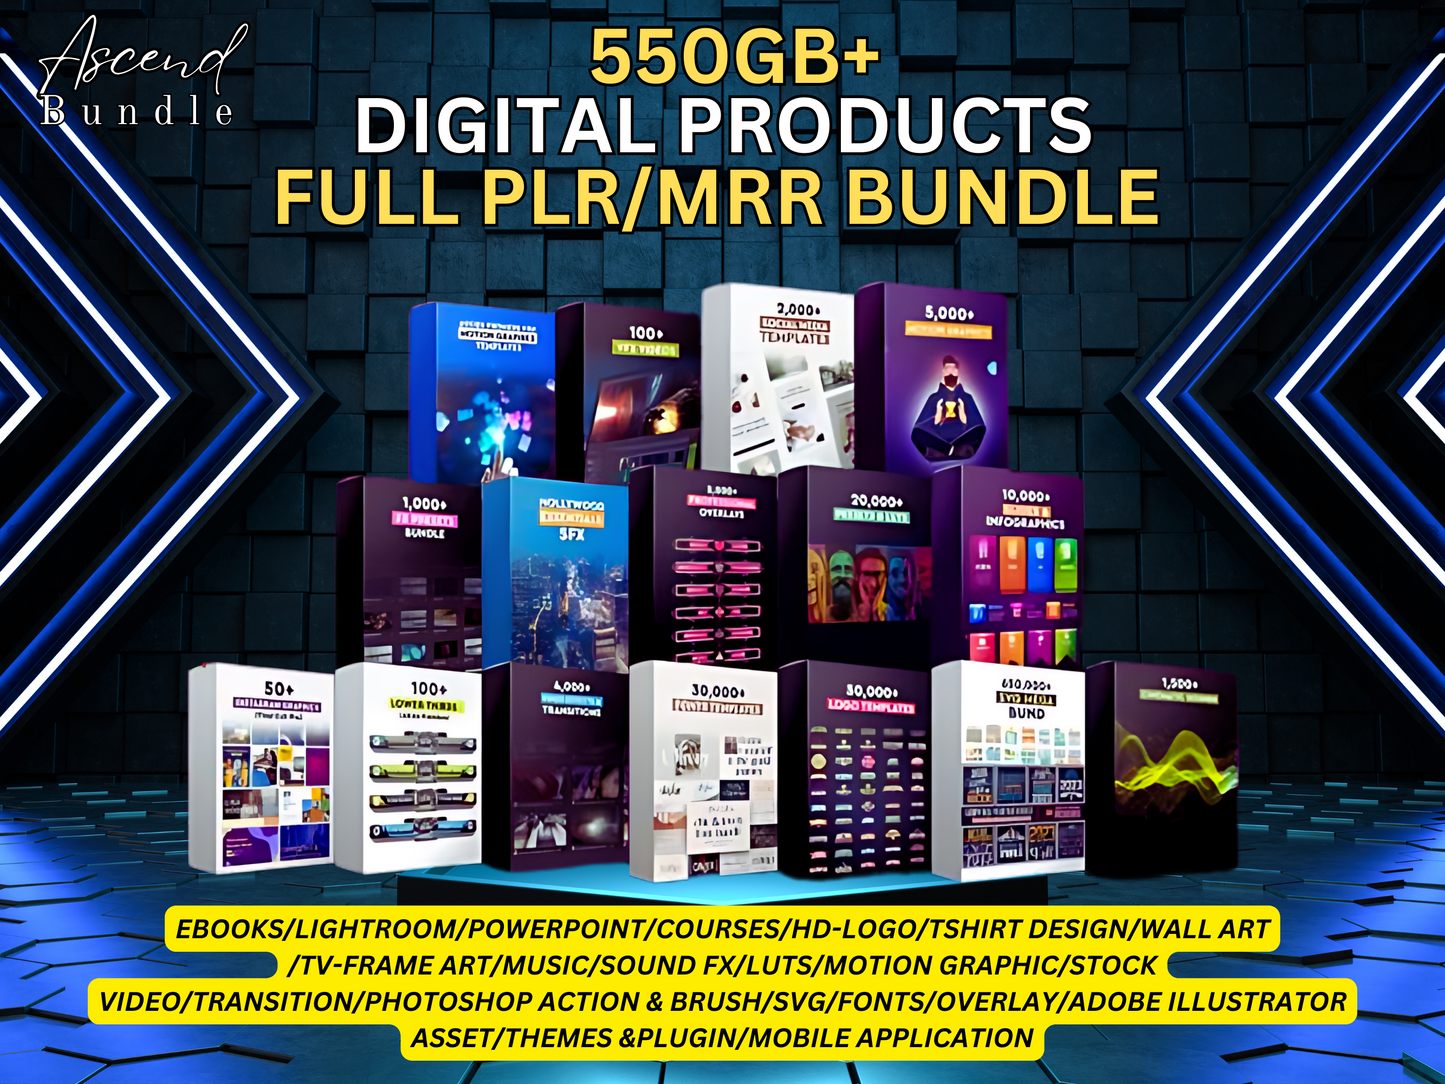 All-In-One Ascend Complete Digital Product Bundle: Graphics, PowerPoint, Courses, Templates, Mockups, STL and More | Full PLR/MRR License